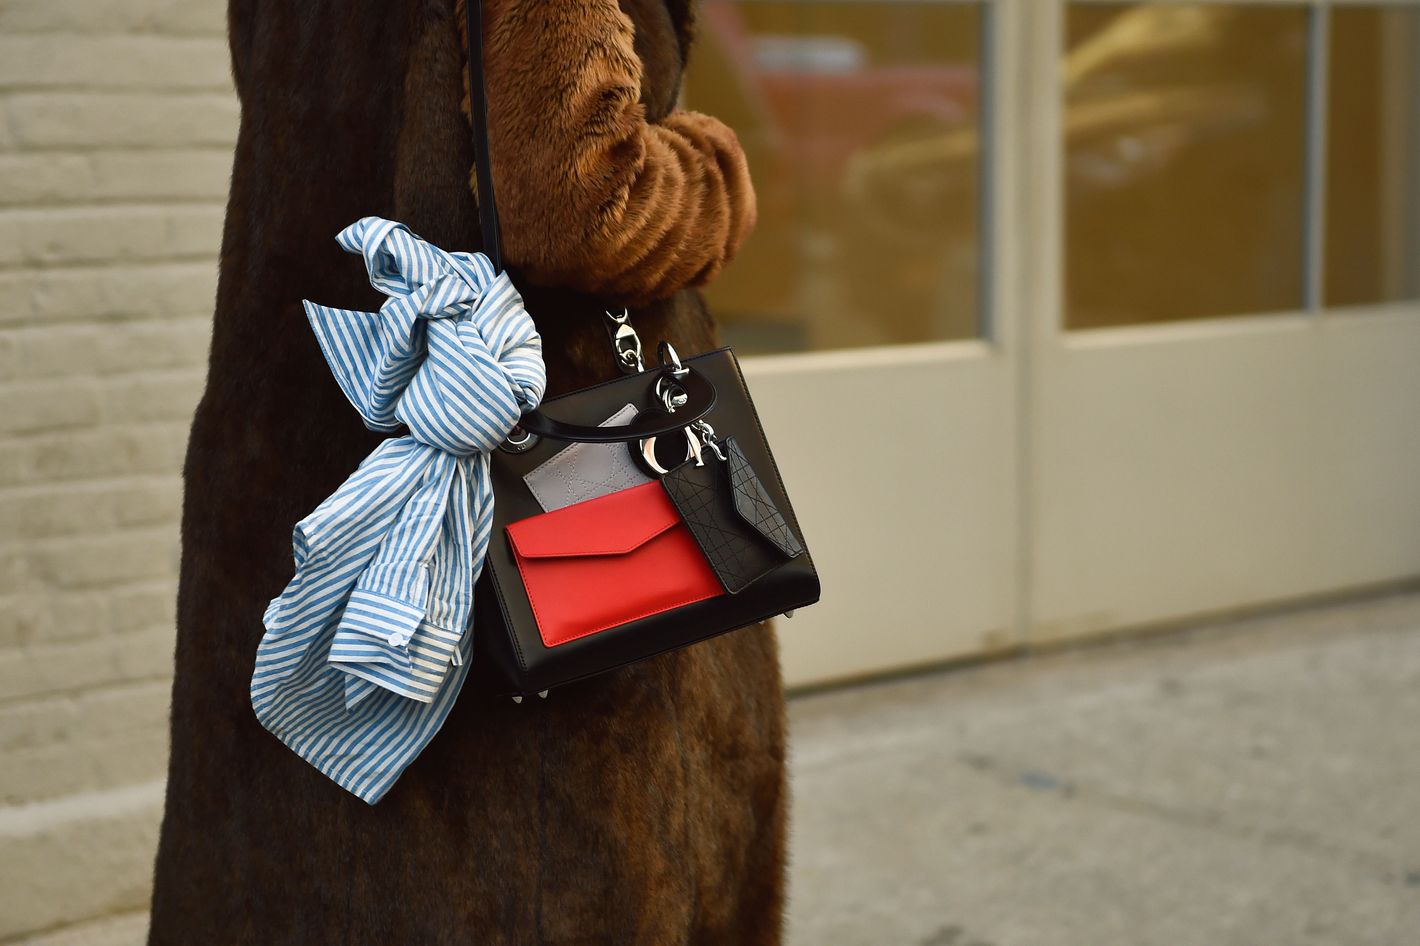 22 Crazy-Cool Bags to Satisfy the Street Style Star in All of Us